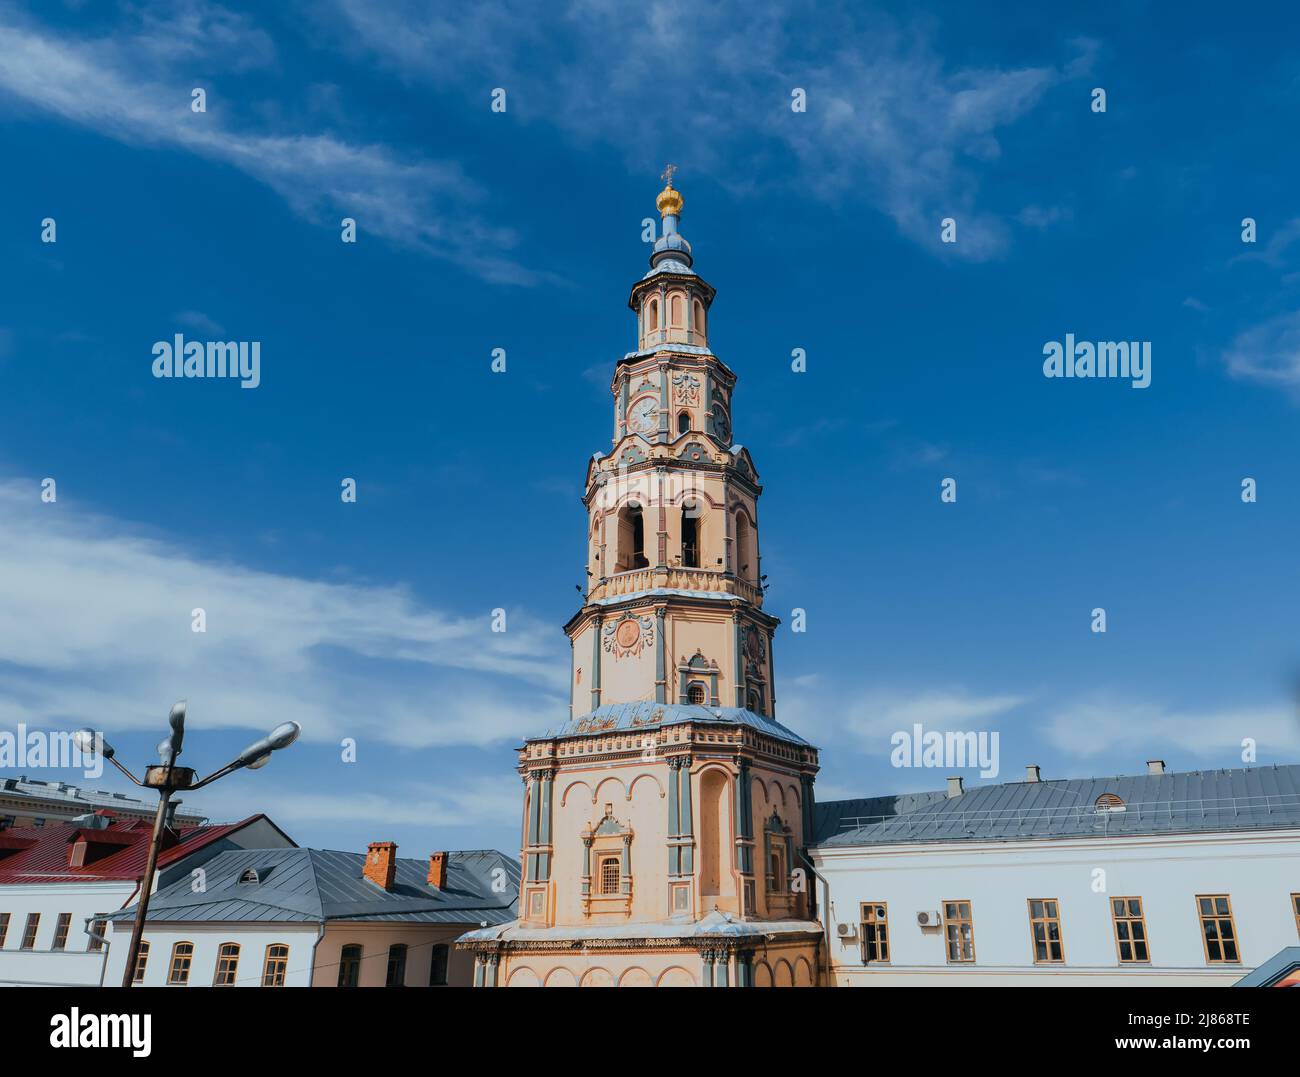 Saints Peter and Paul Cathedral or Petropavlovsky Cathedral. Kazan, Tatarstan Republic, Russia. Orthodox church in baroque style. Kazan architectural landmark. Cathedral Bell Tower Stock Photo